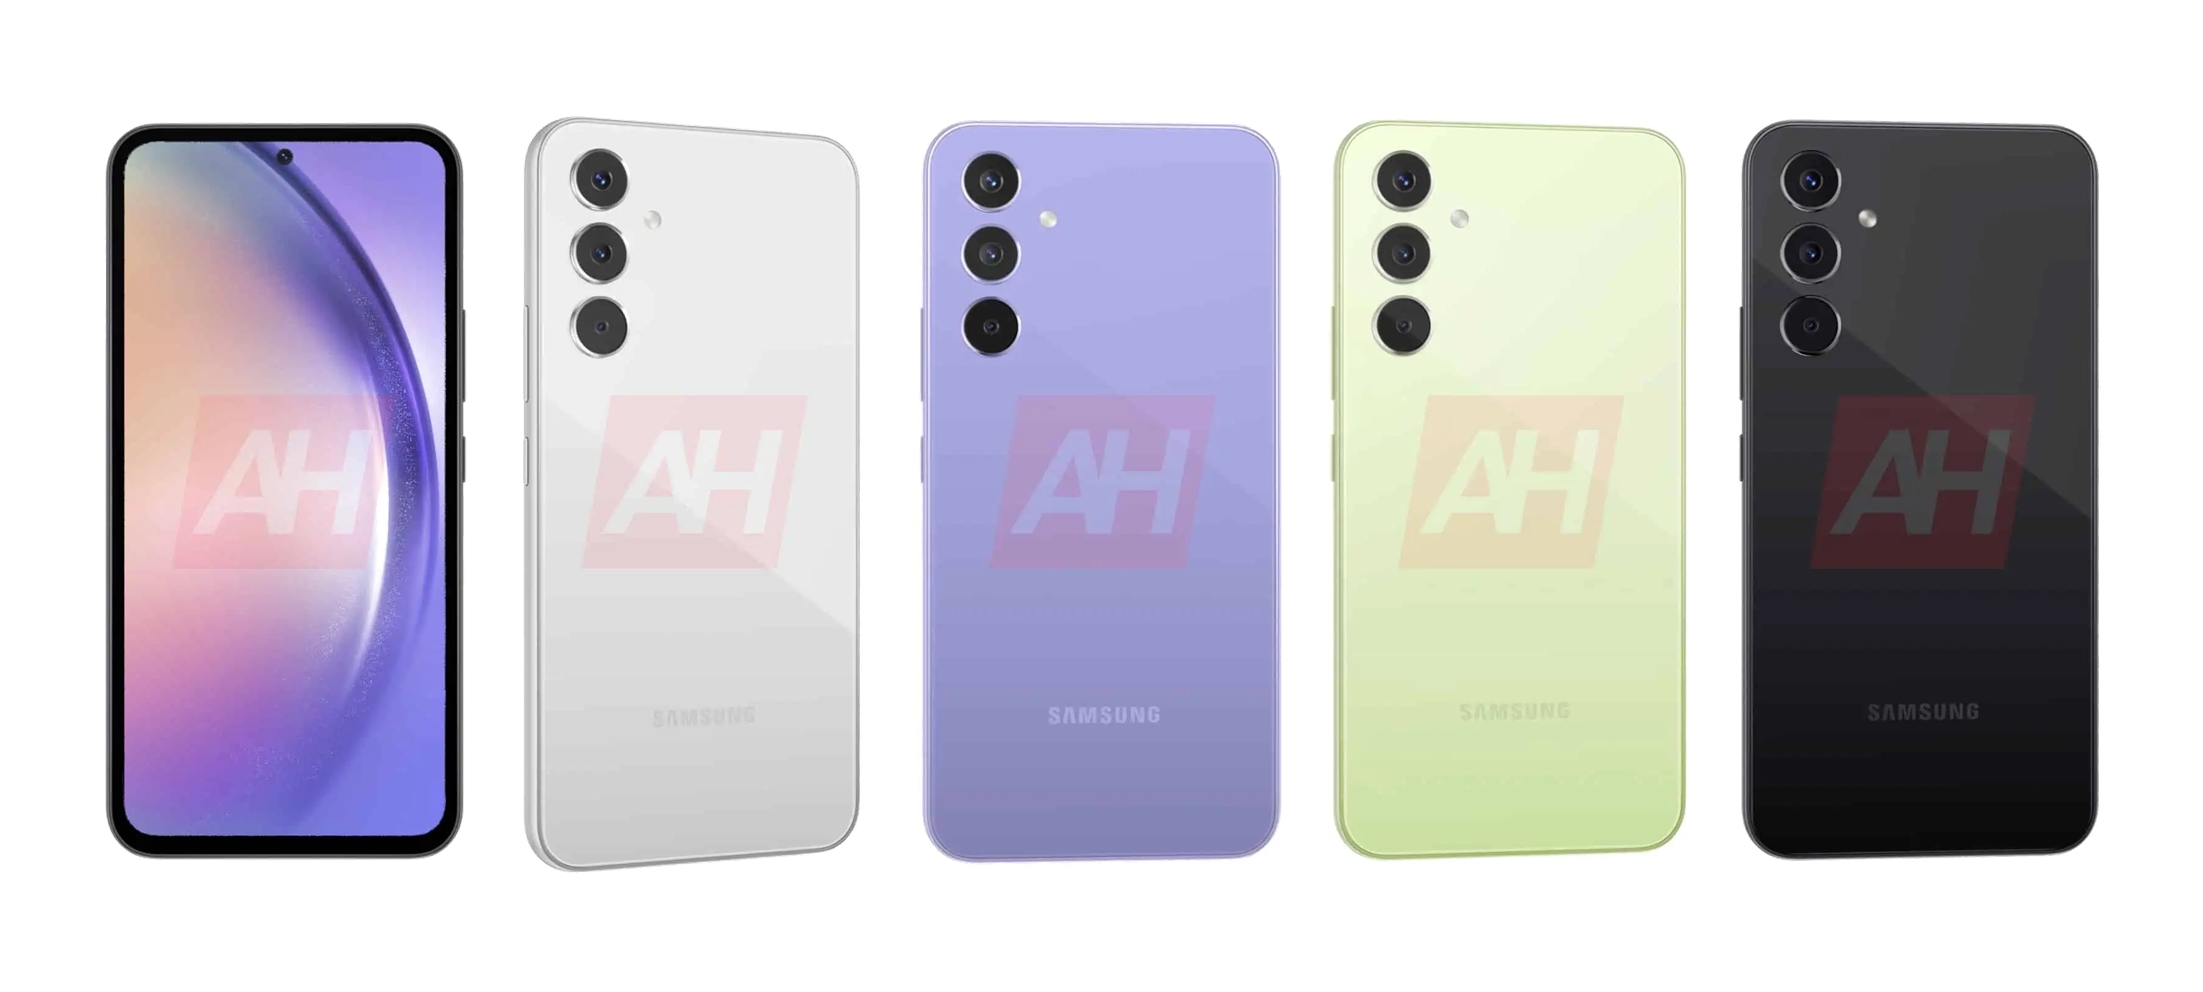 Samsung Galaxy A54 and Galaxy A34 revealed in new leaks